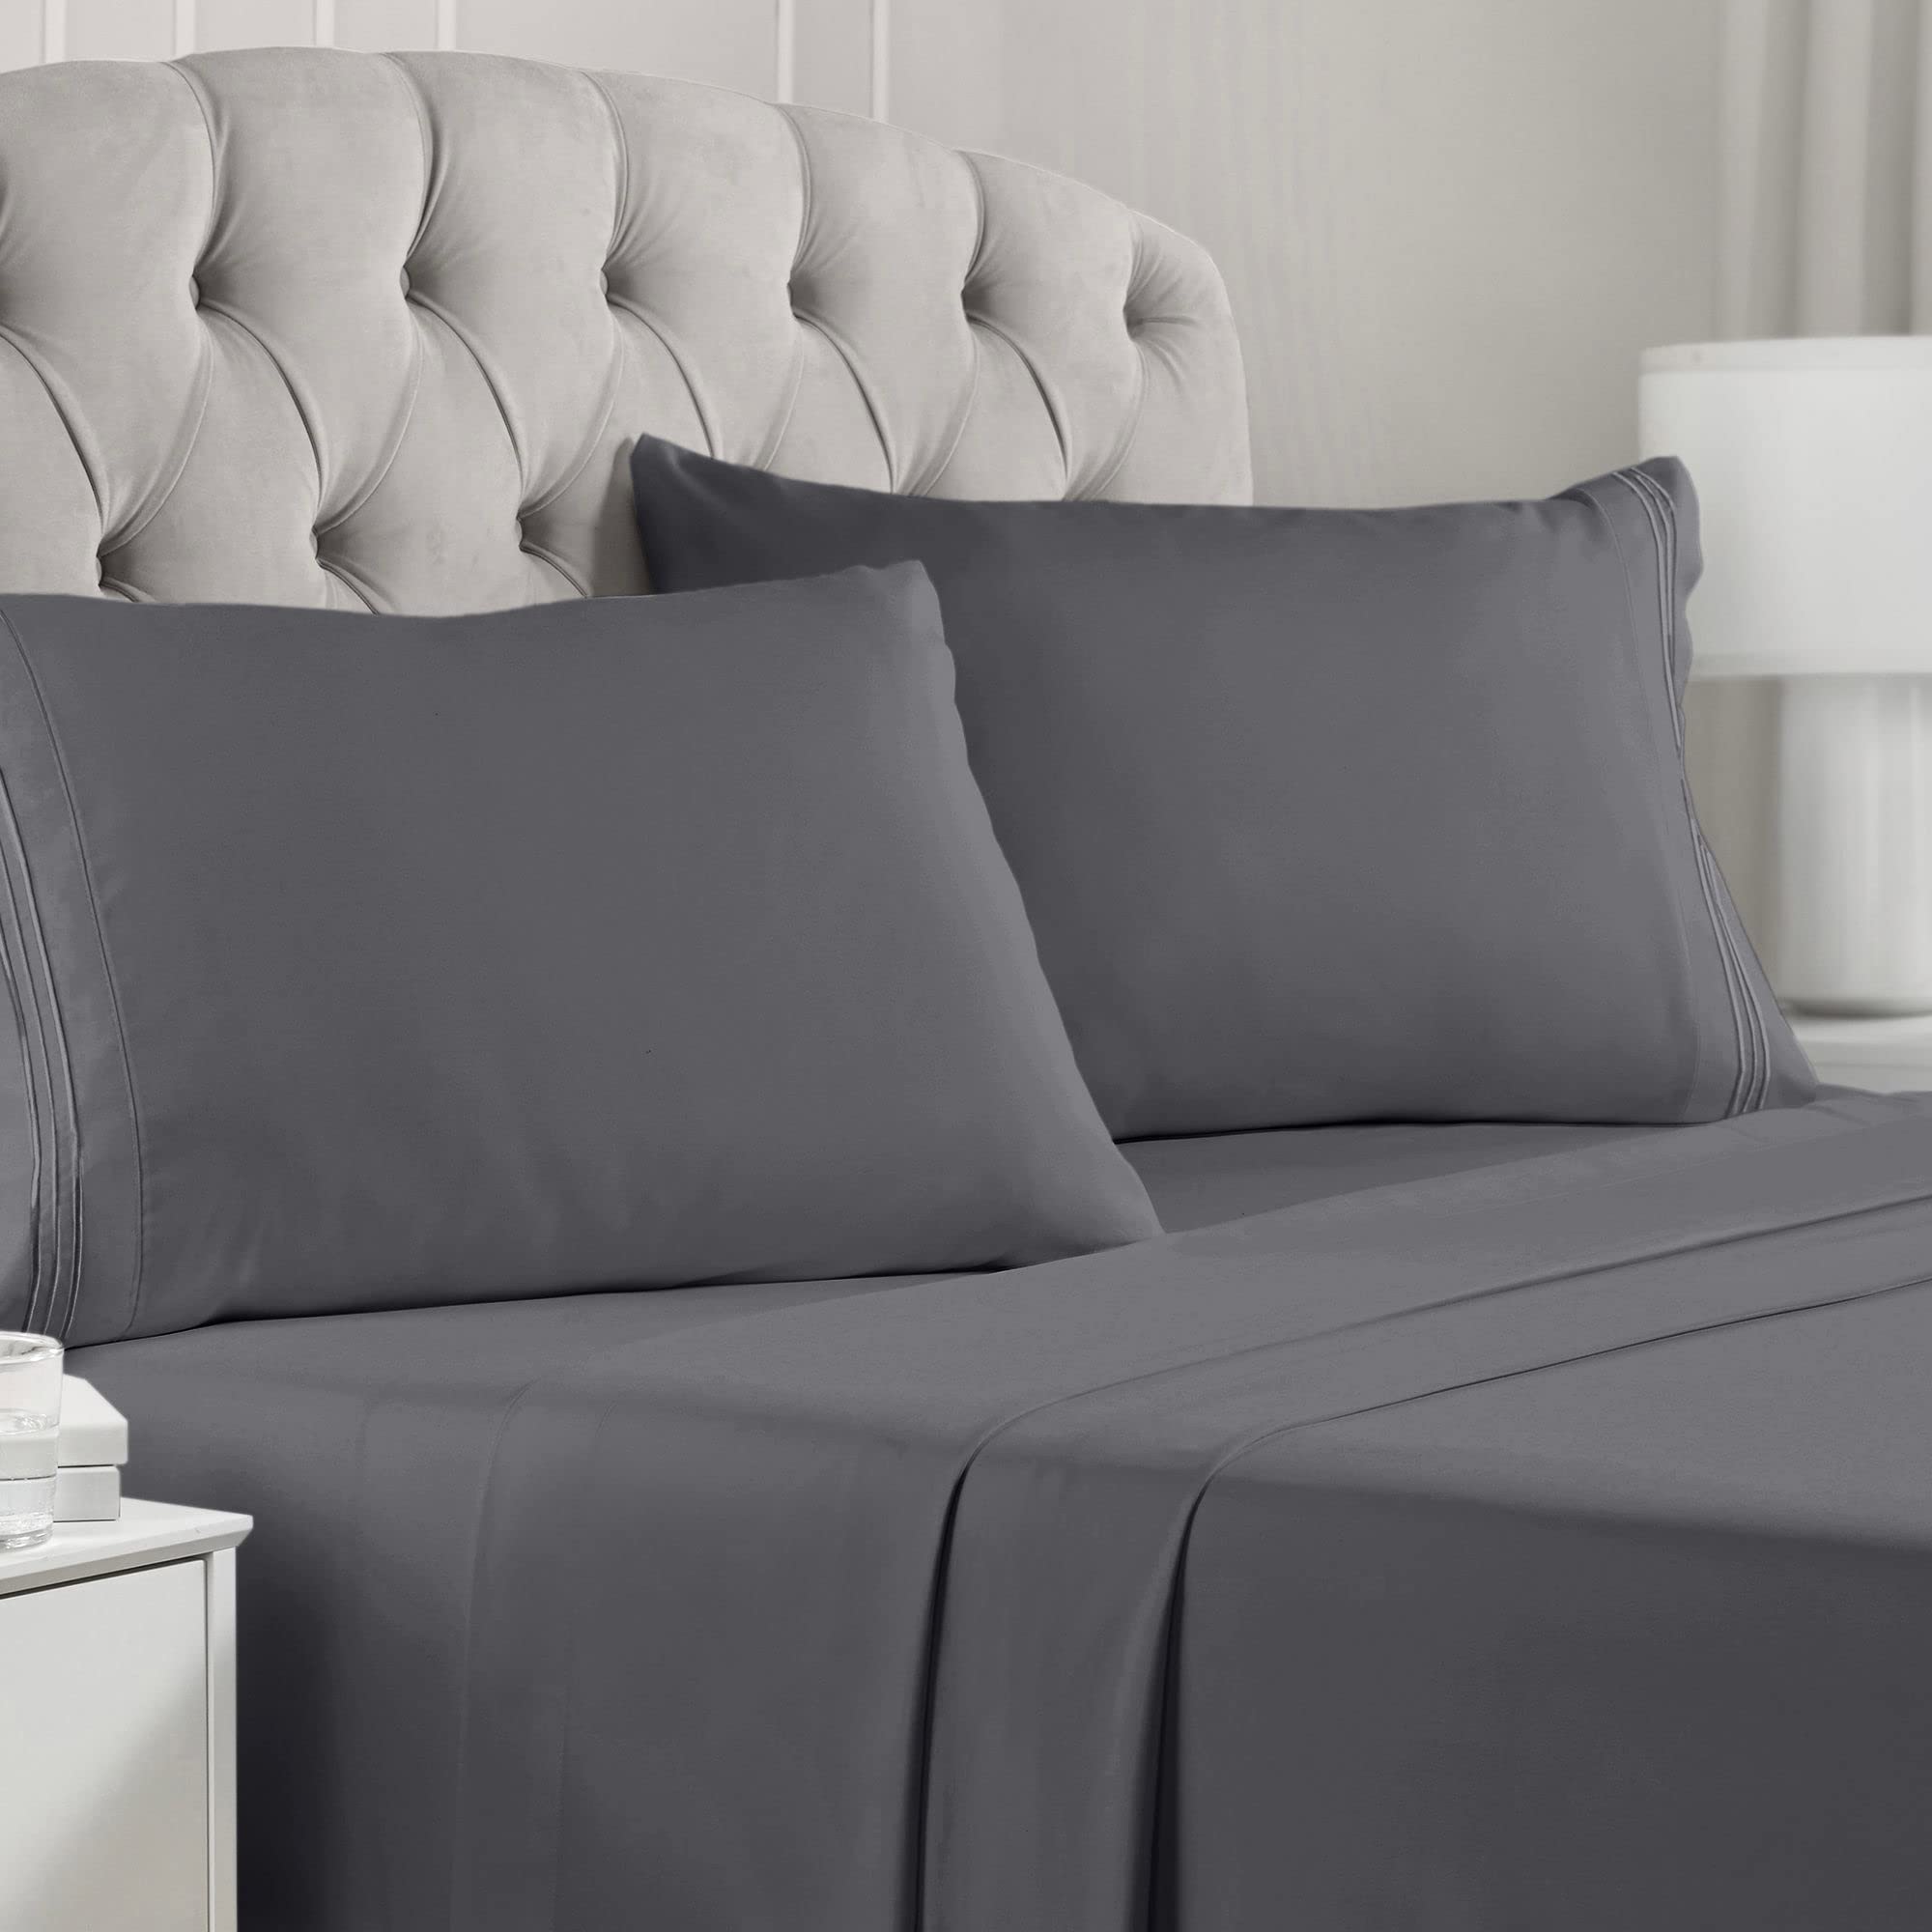 Book Cover Mellanni California King Sheets - Hotel Luxury 1800 Bedding Sheets & Pillowcases - Extra Soft Cooling Bed Sheets - Deep Pocket up to 16 inch - Wrinkle, Fade, Stain Resistant - 4 Piece (Cal King, Gray)